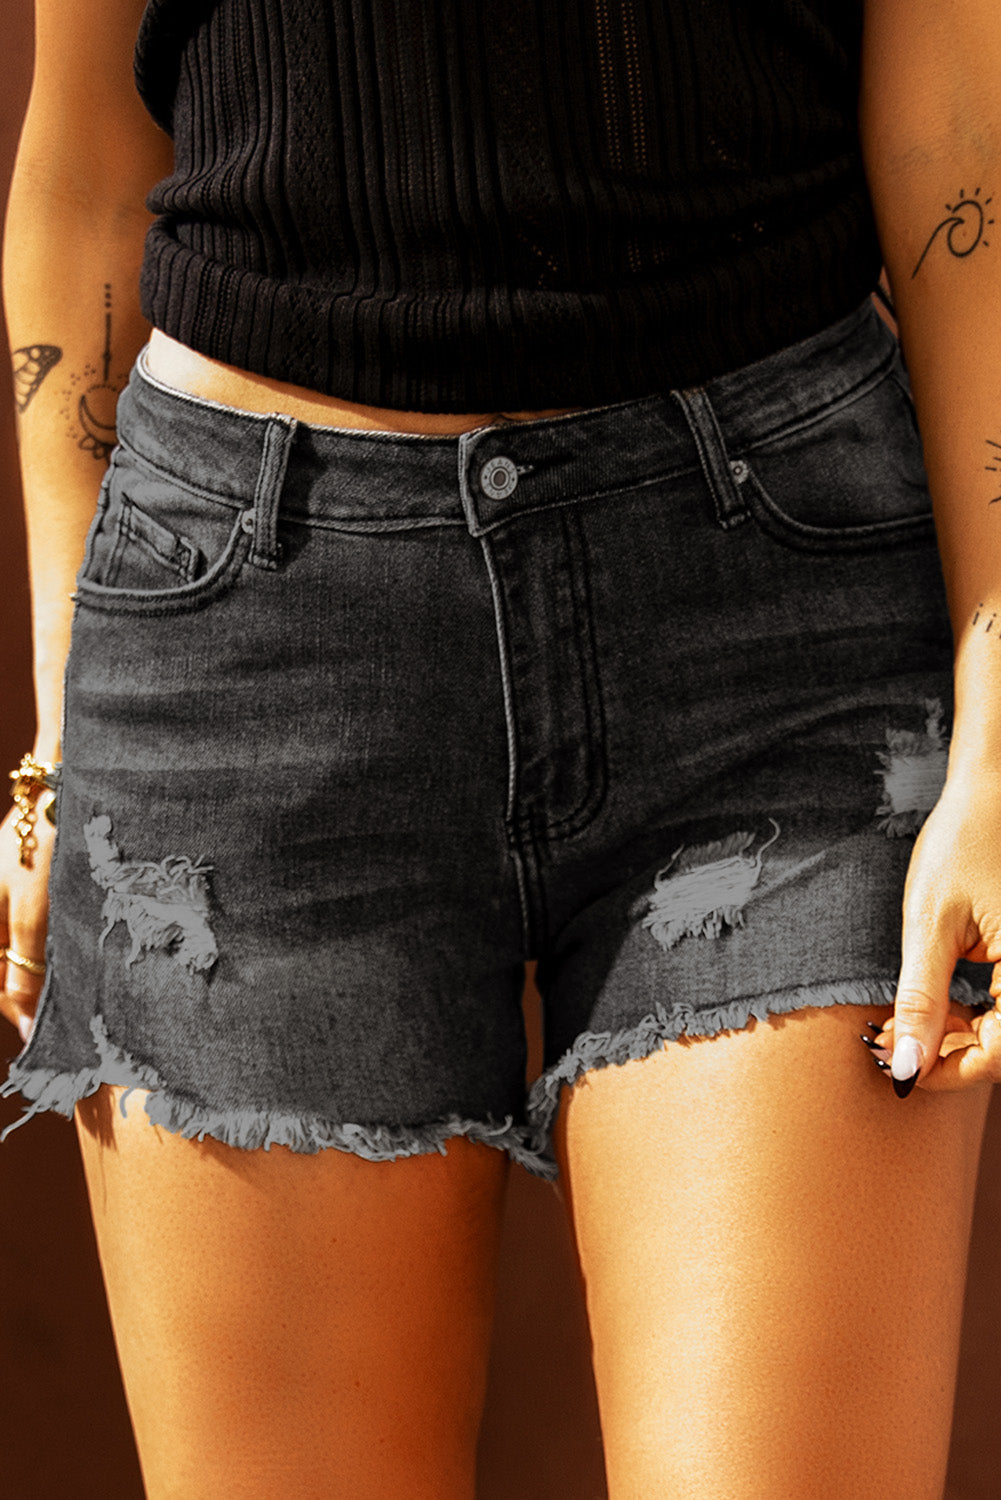 Distressed Ripped Denim Shorts with Pockets